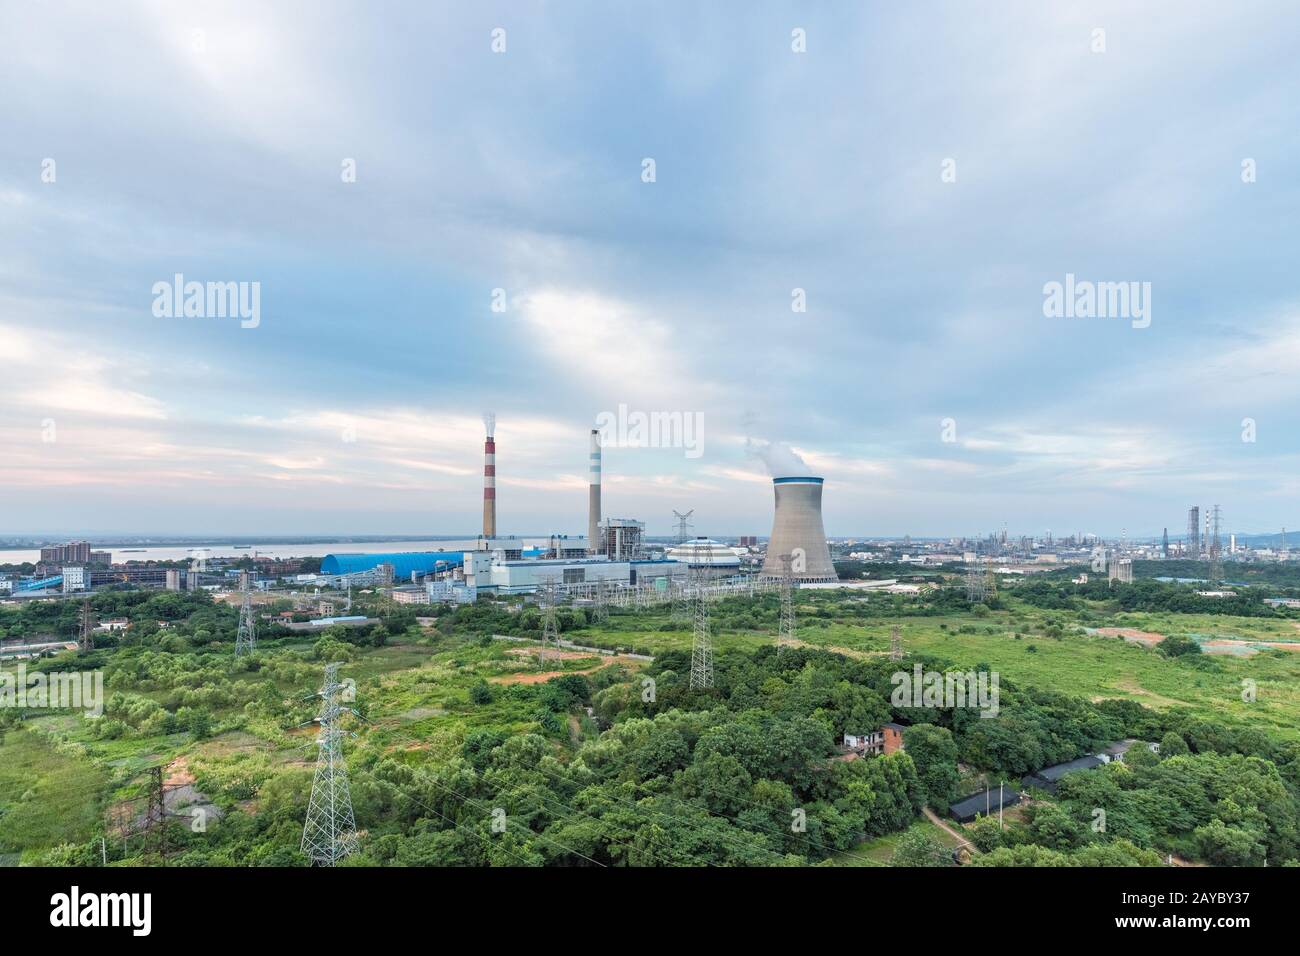 coal-fired power plant at dusk Stock Photo